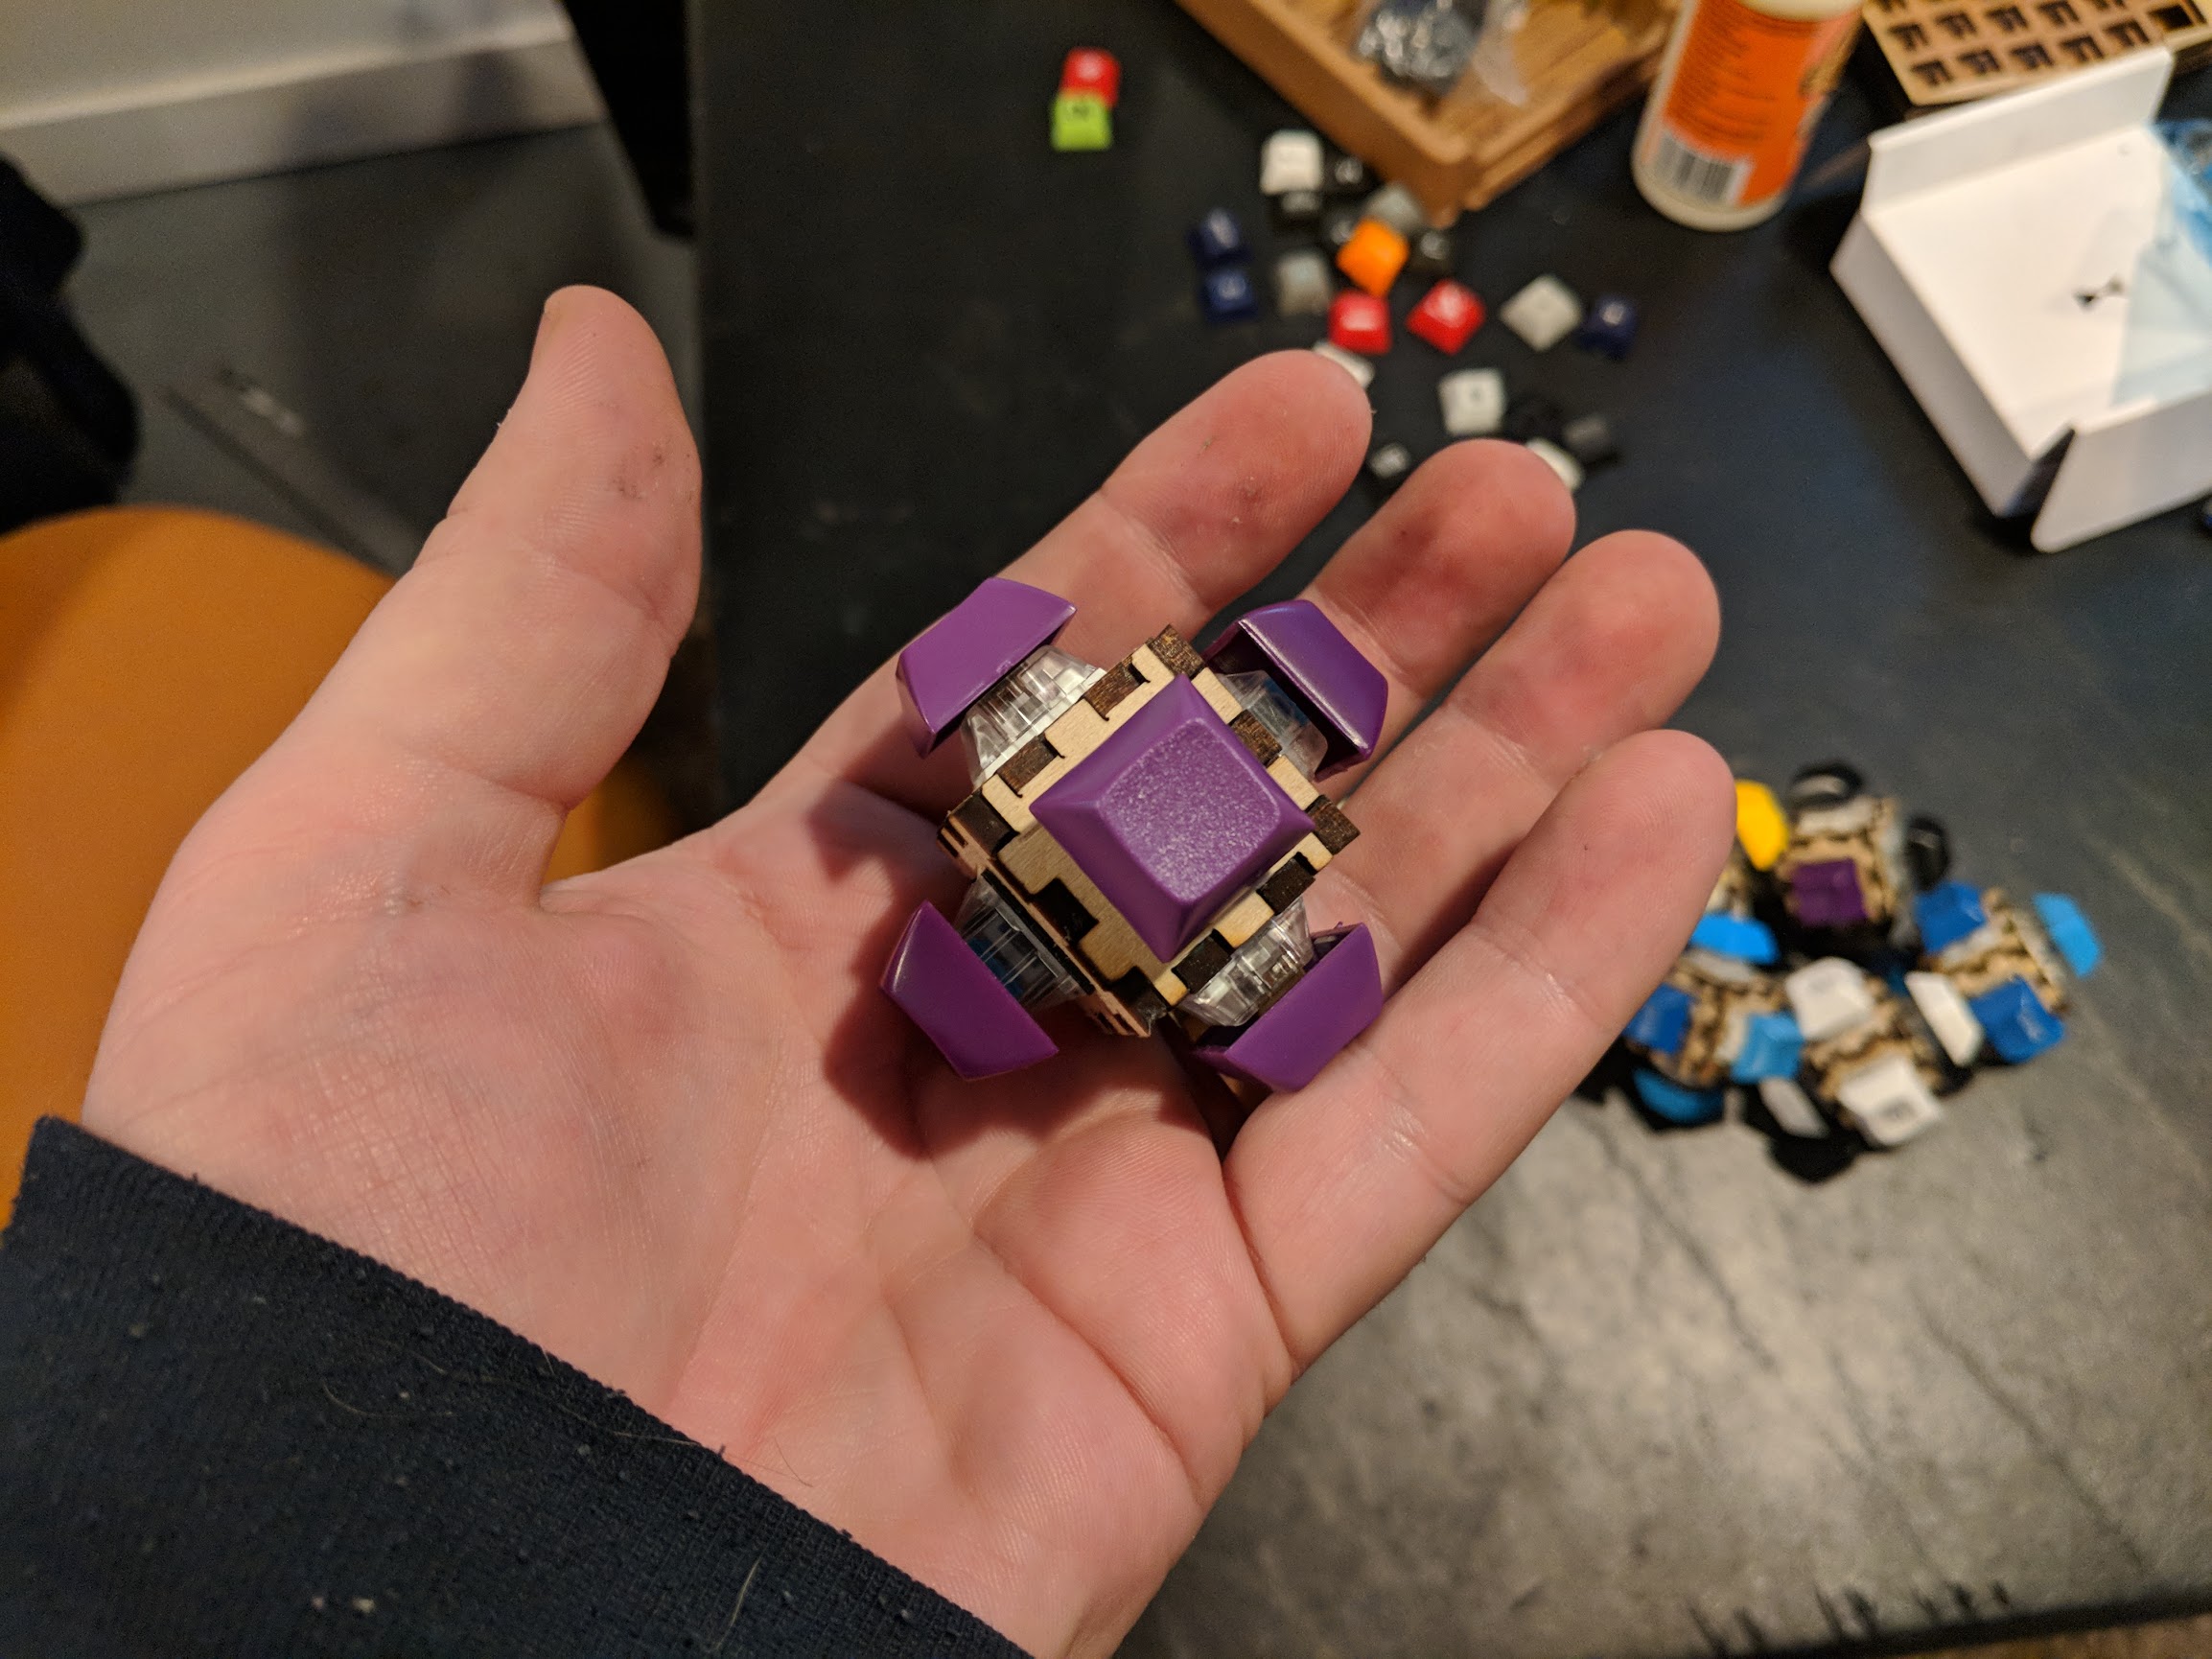 Fidget cubes fully assembled with keycaps